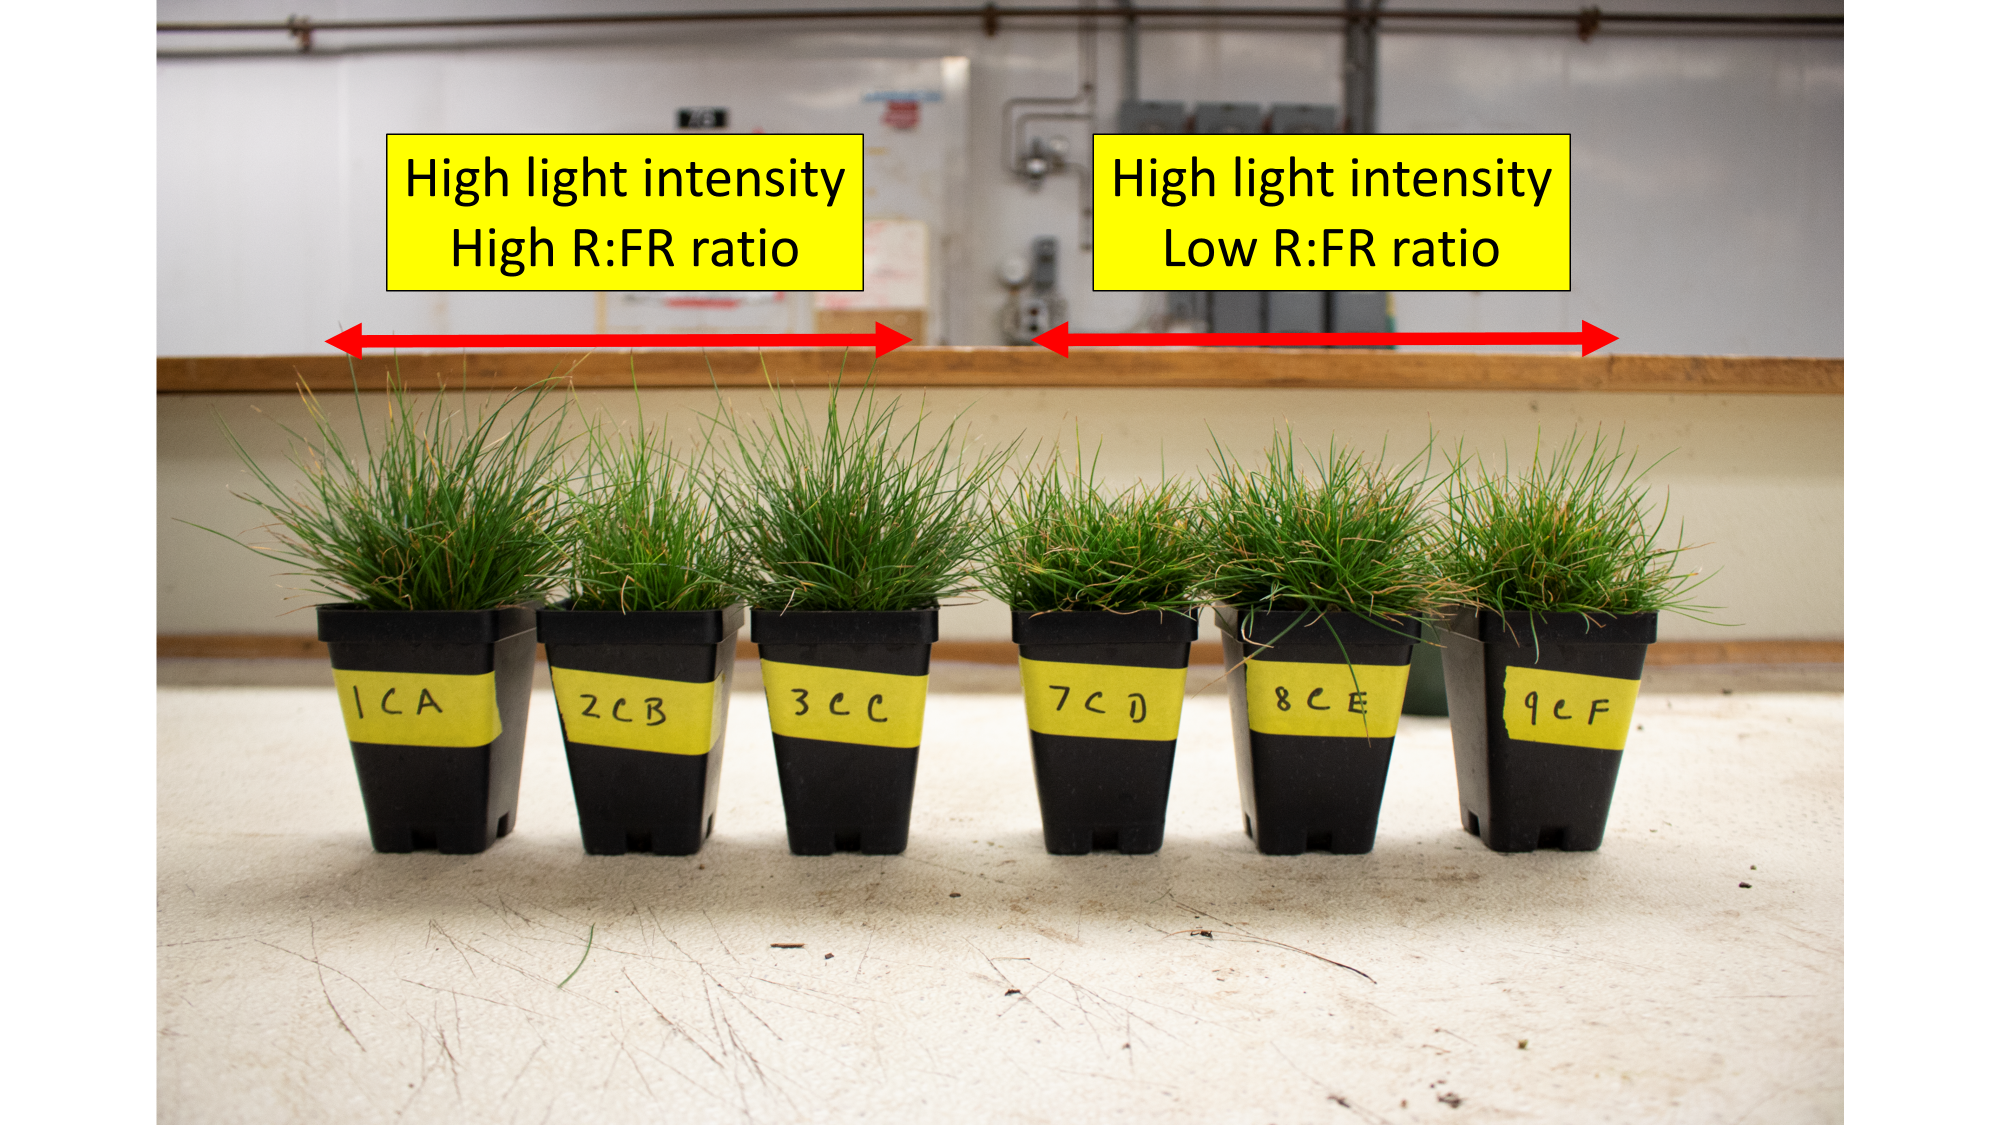 2 sets of three pots with turfgrasses growing in them; text is above the first set says "High light intensity High R:FR ratio" and the second set says "High light intensity Low R:FR ratio"